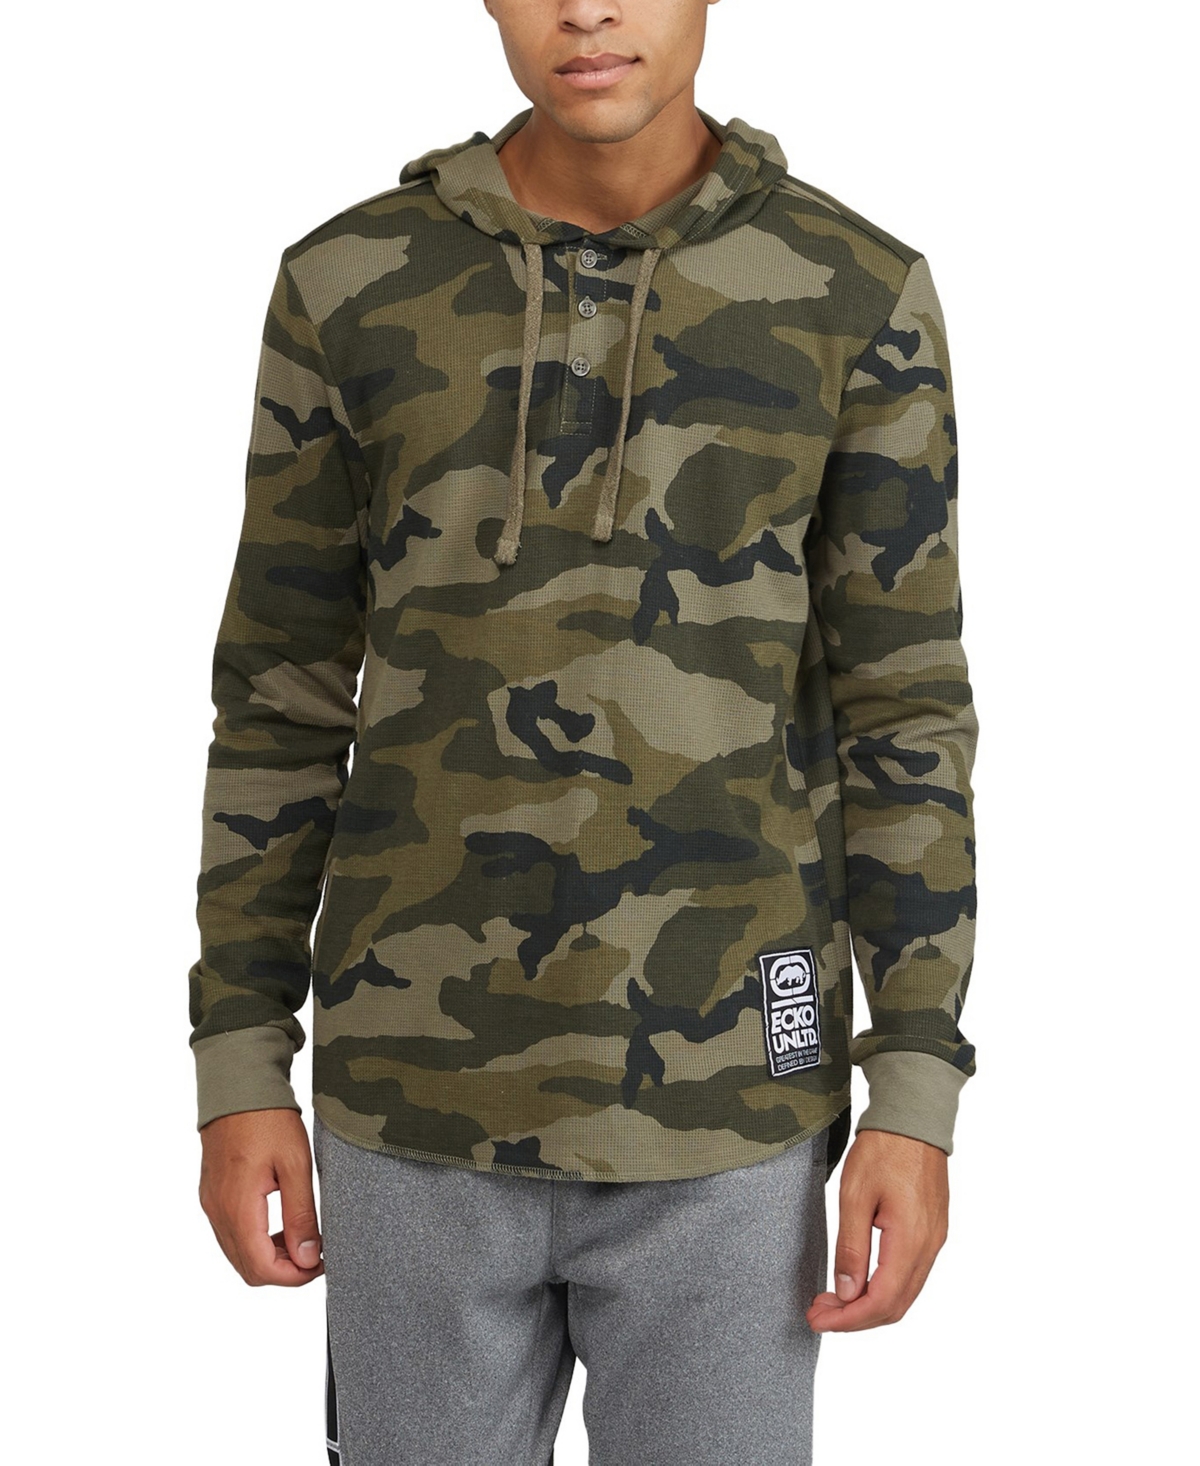 Men's Hooded Solid Stunner 2.0 Thermal Sweater - Street Camo